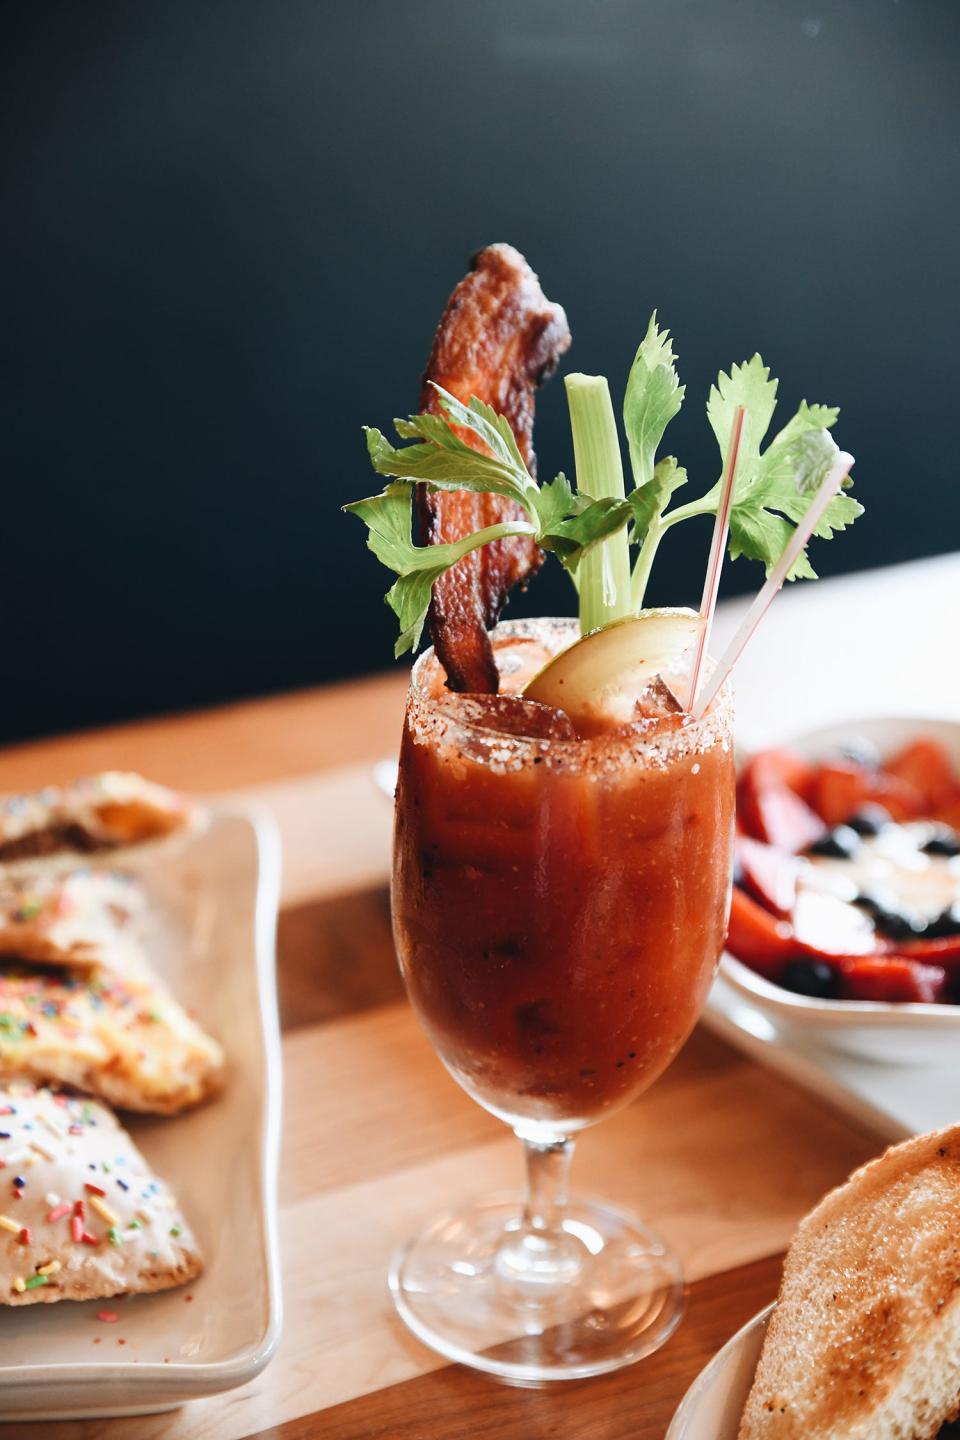 A bloody Mary at HomeGrown, which opened in the Crescent Building in Sherman Hill.